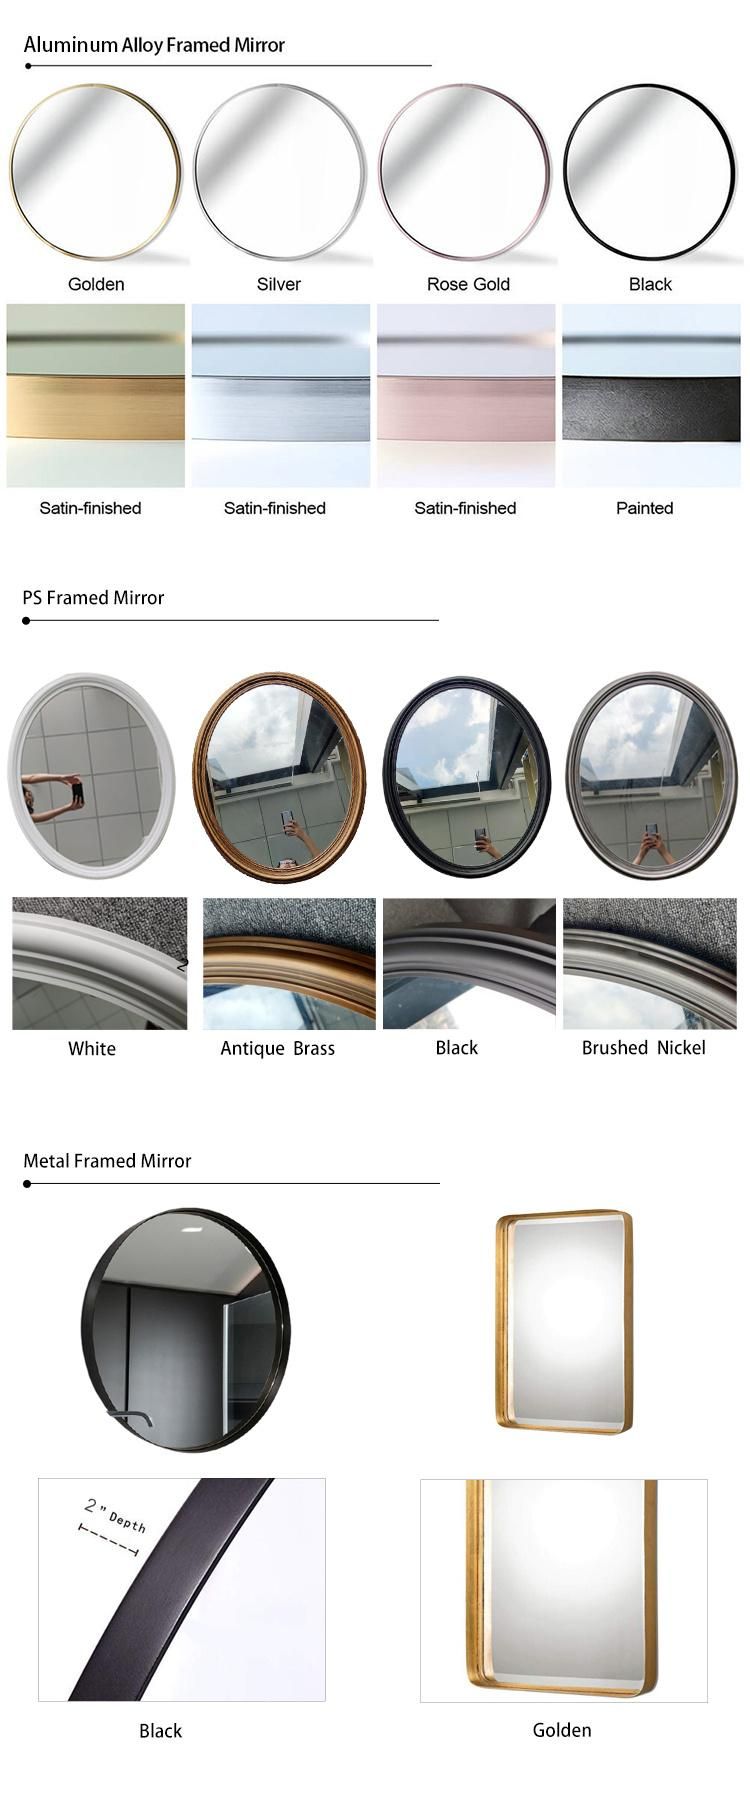 Fashion Premium Home Decorative Quality Professional Design Glass Metal Framed Make-up Wall Hanging Mirror